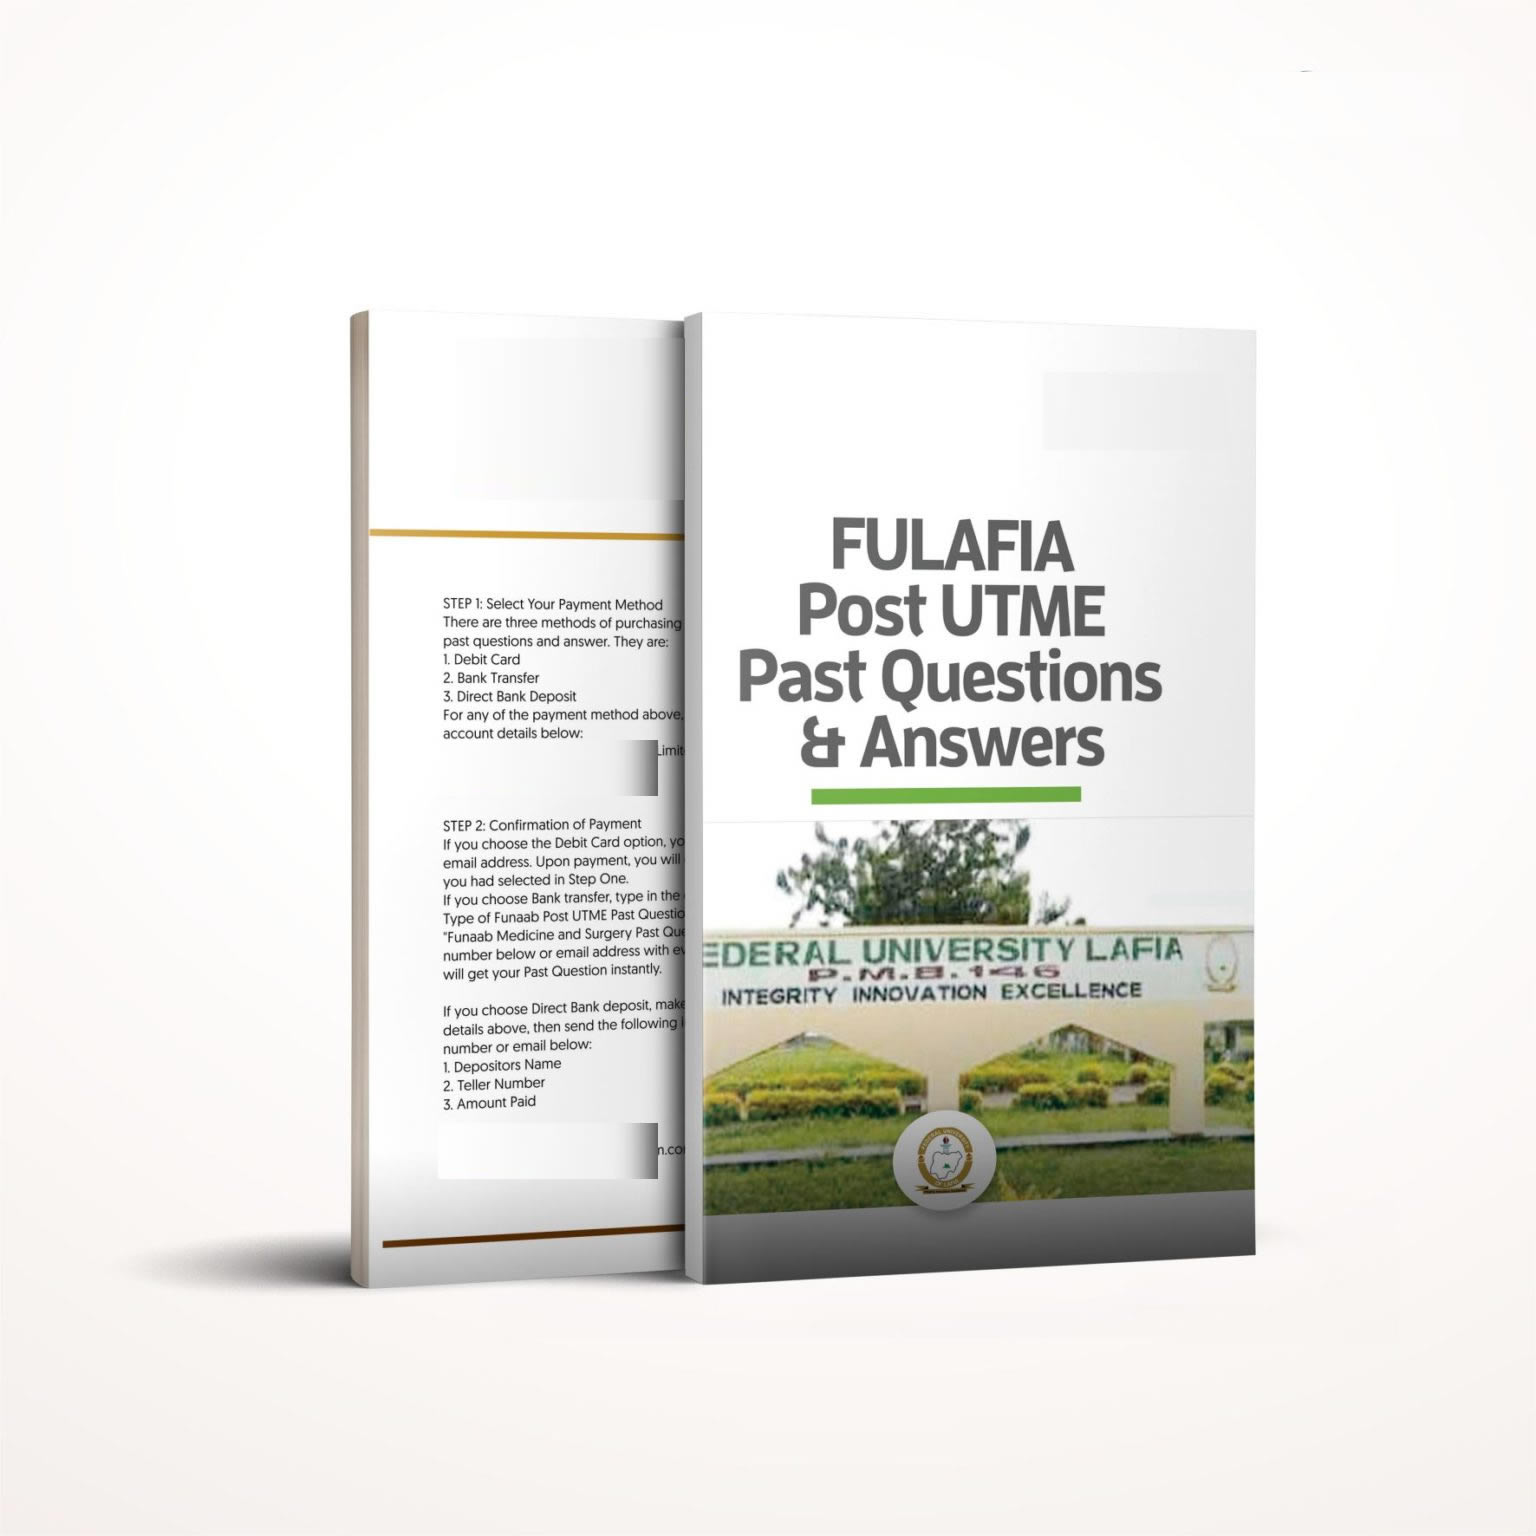 fulafia post utme past questions and answers - Pdf